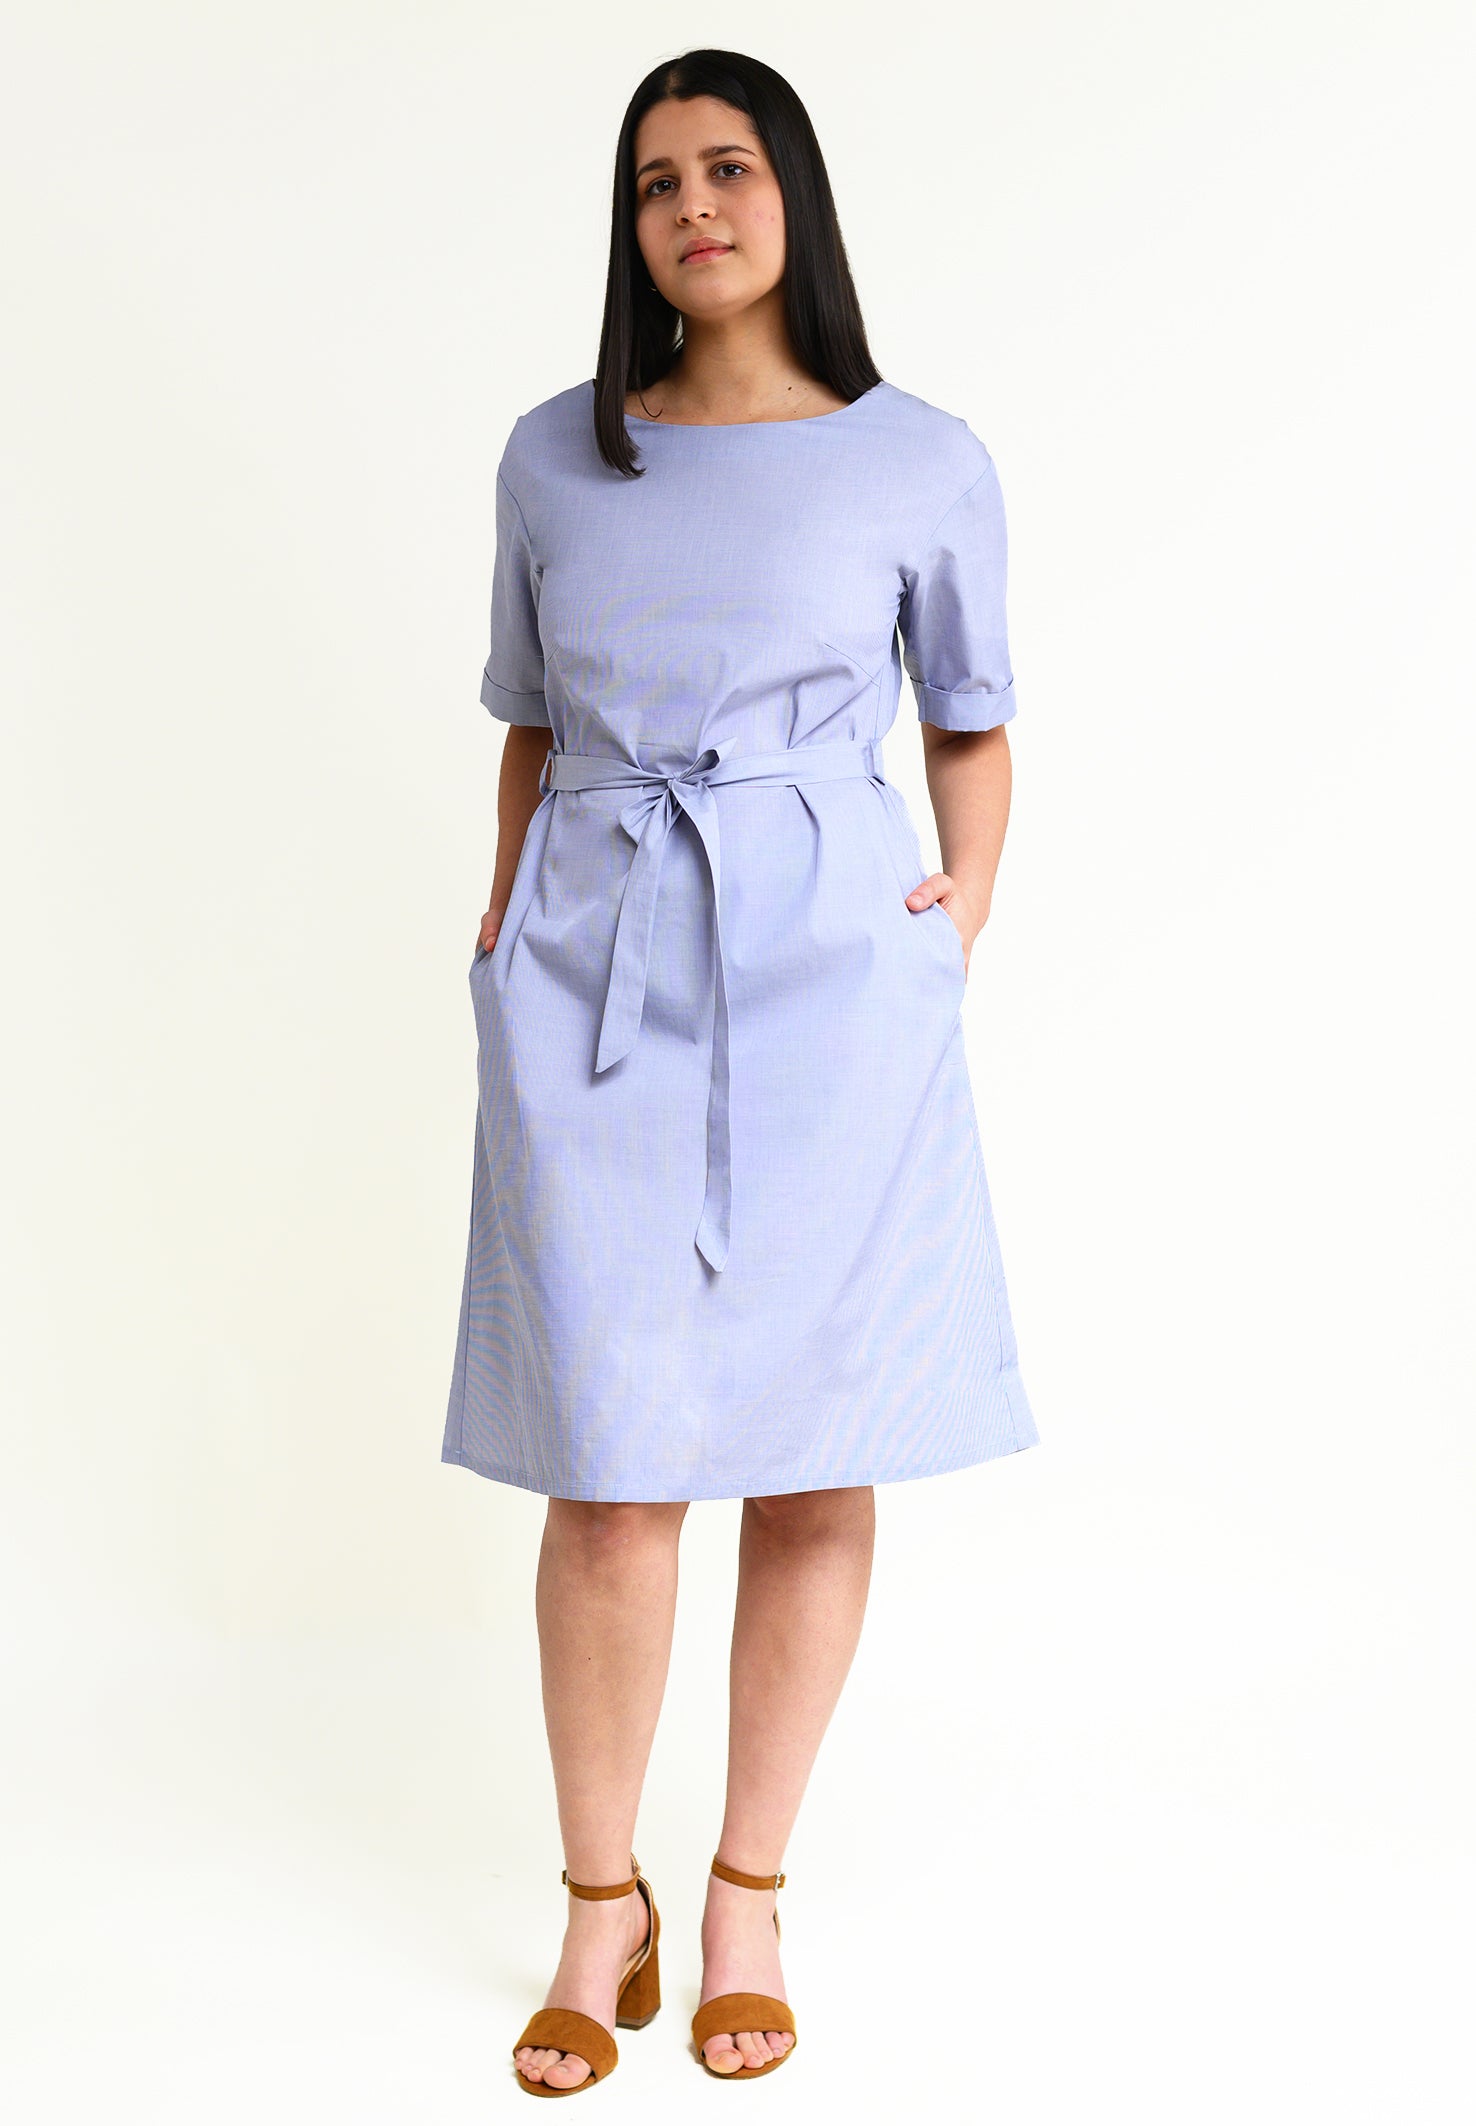 Knee-length summer dress with sleeves Ed-daa in light blue made of 100% organic cotton 